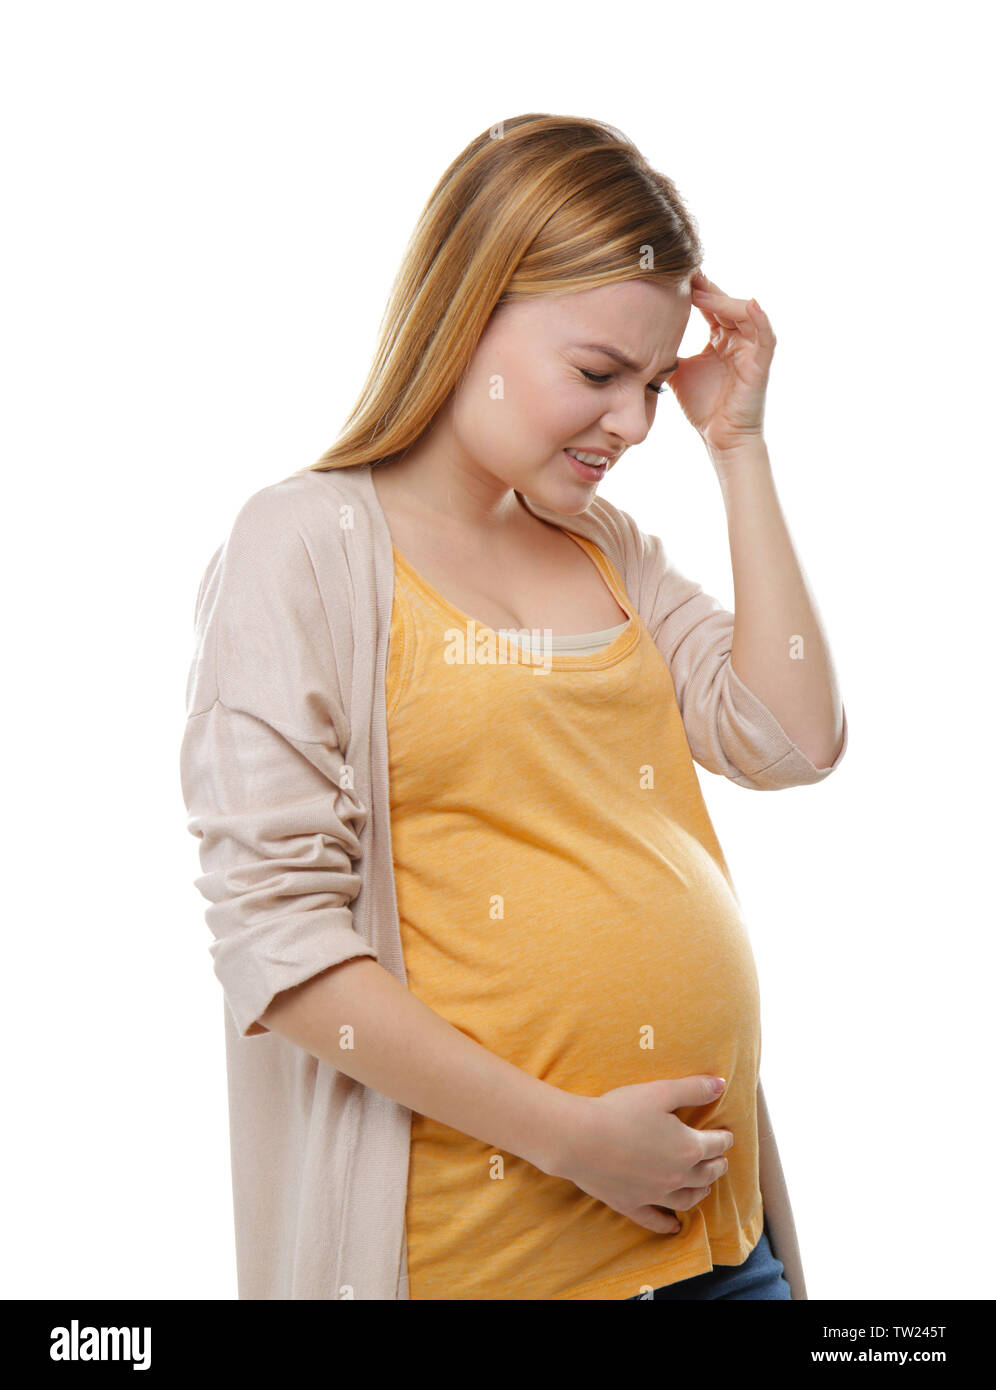 Pregnant woman suffering from headaches on white background Stock Photo